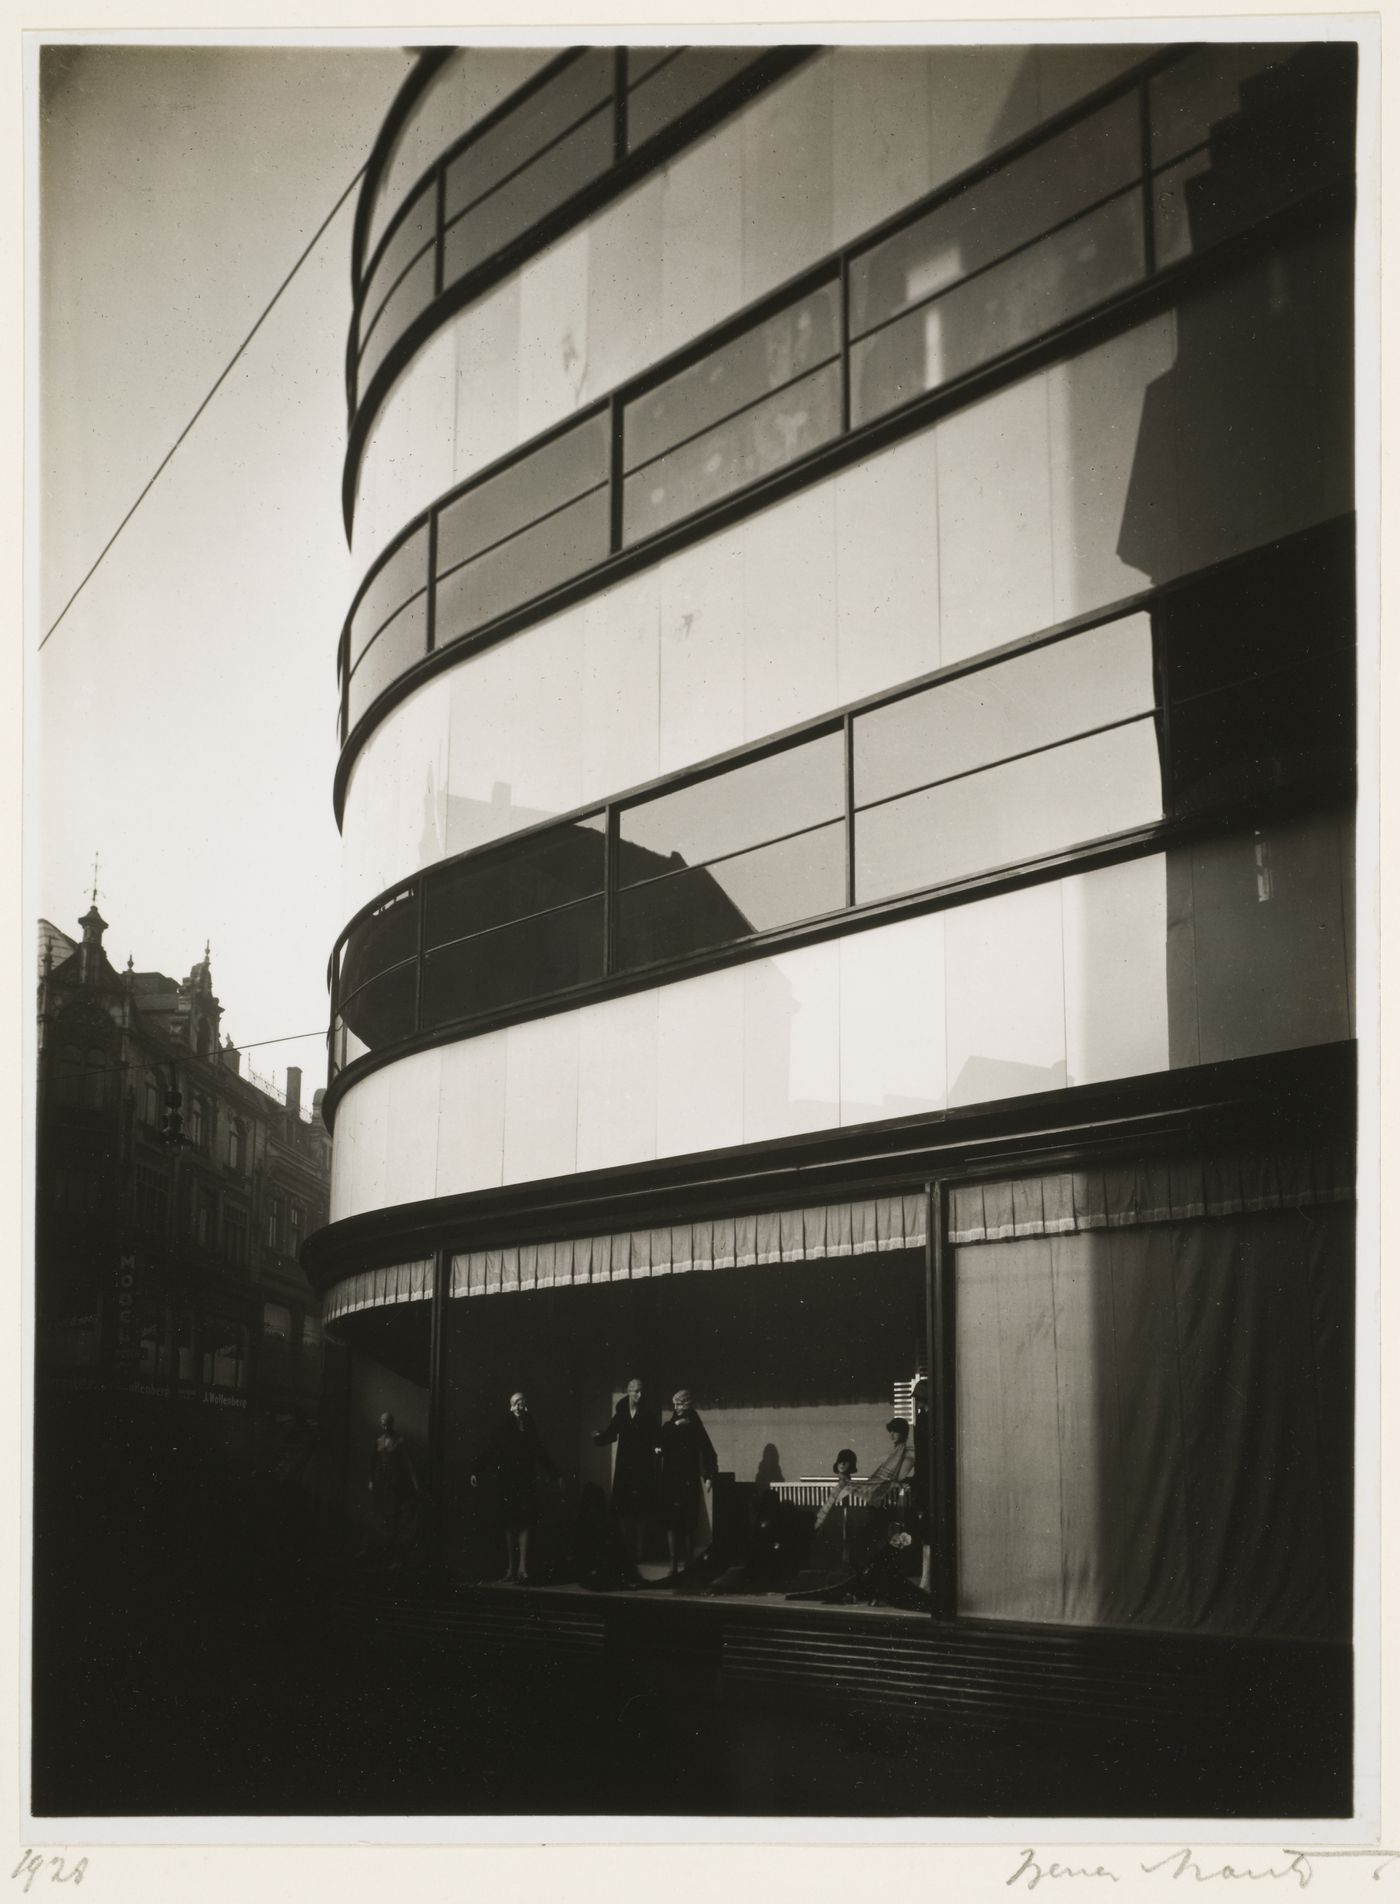 Exterior view of façade of department store showing four stories, with man niking in window, Gelsenkirchen, Germany